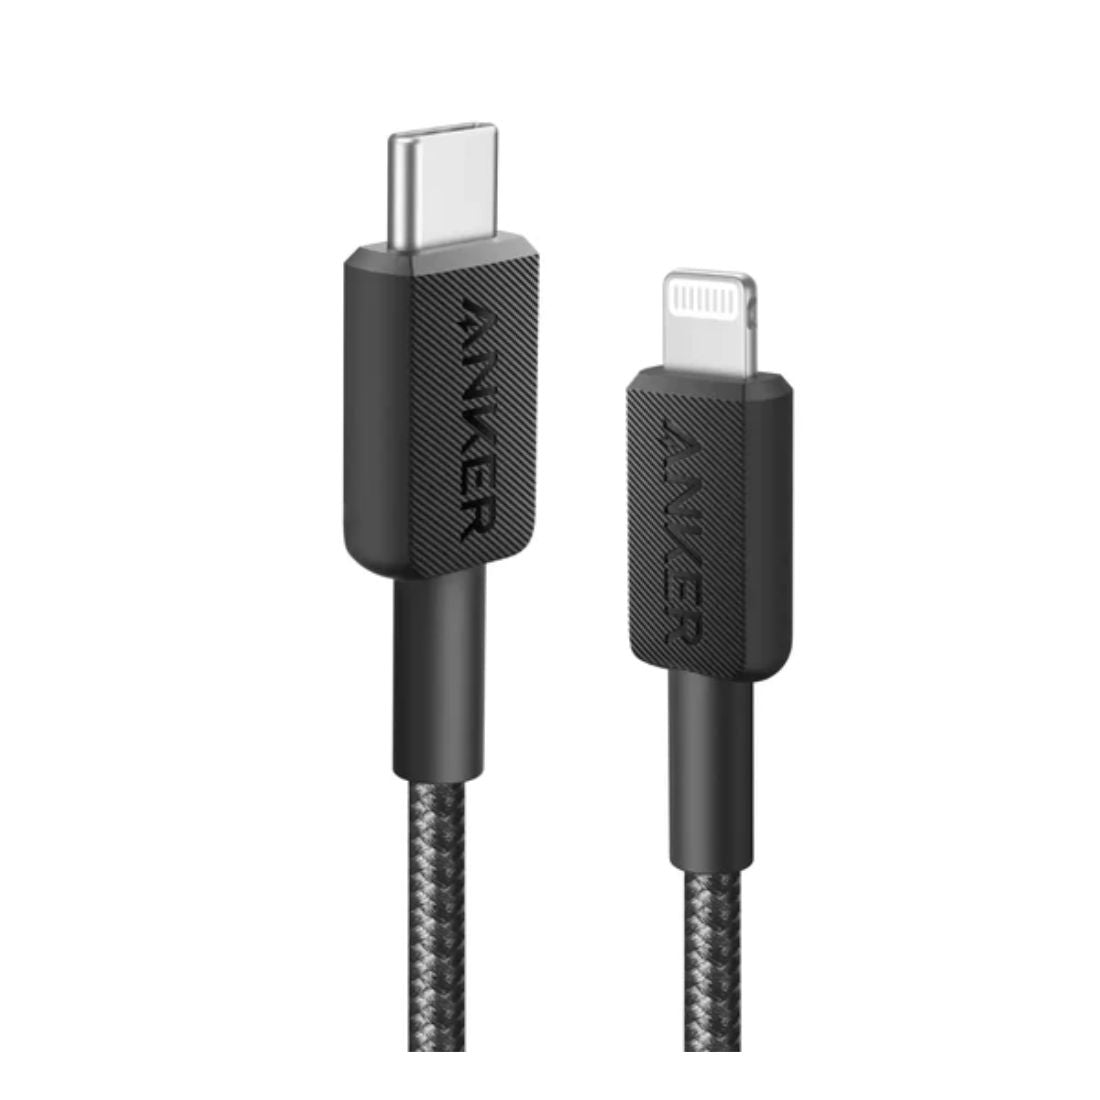 Anker 322 USB-C to Lightning Cable Braided (0.9m/3ft) A81B5H11 - Black